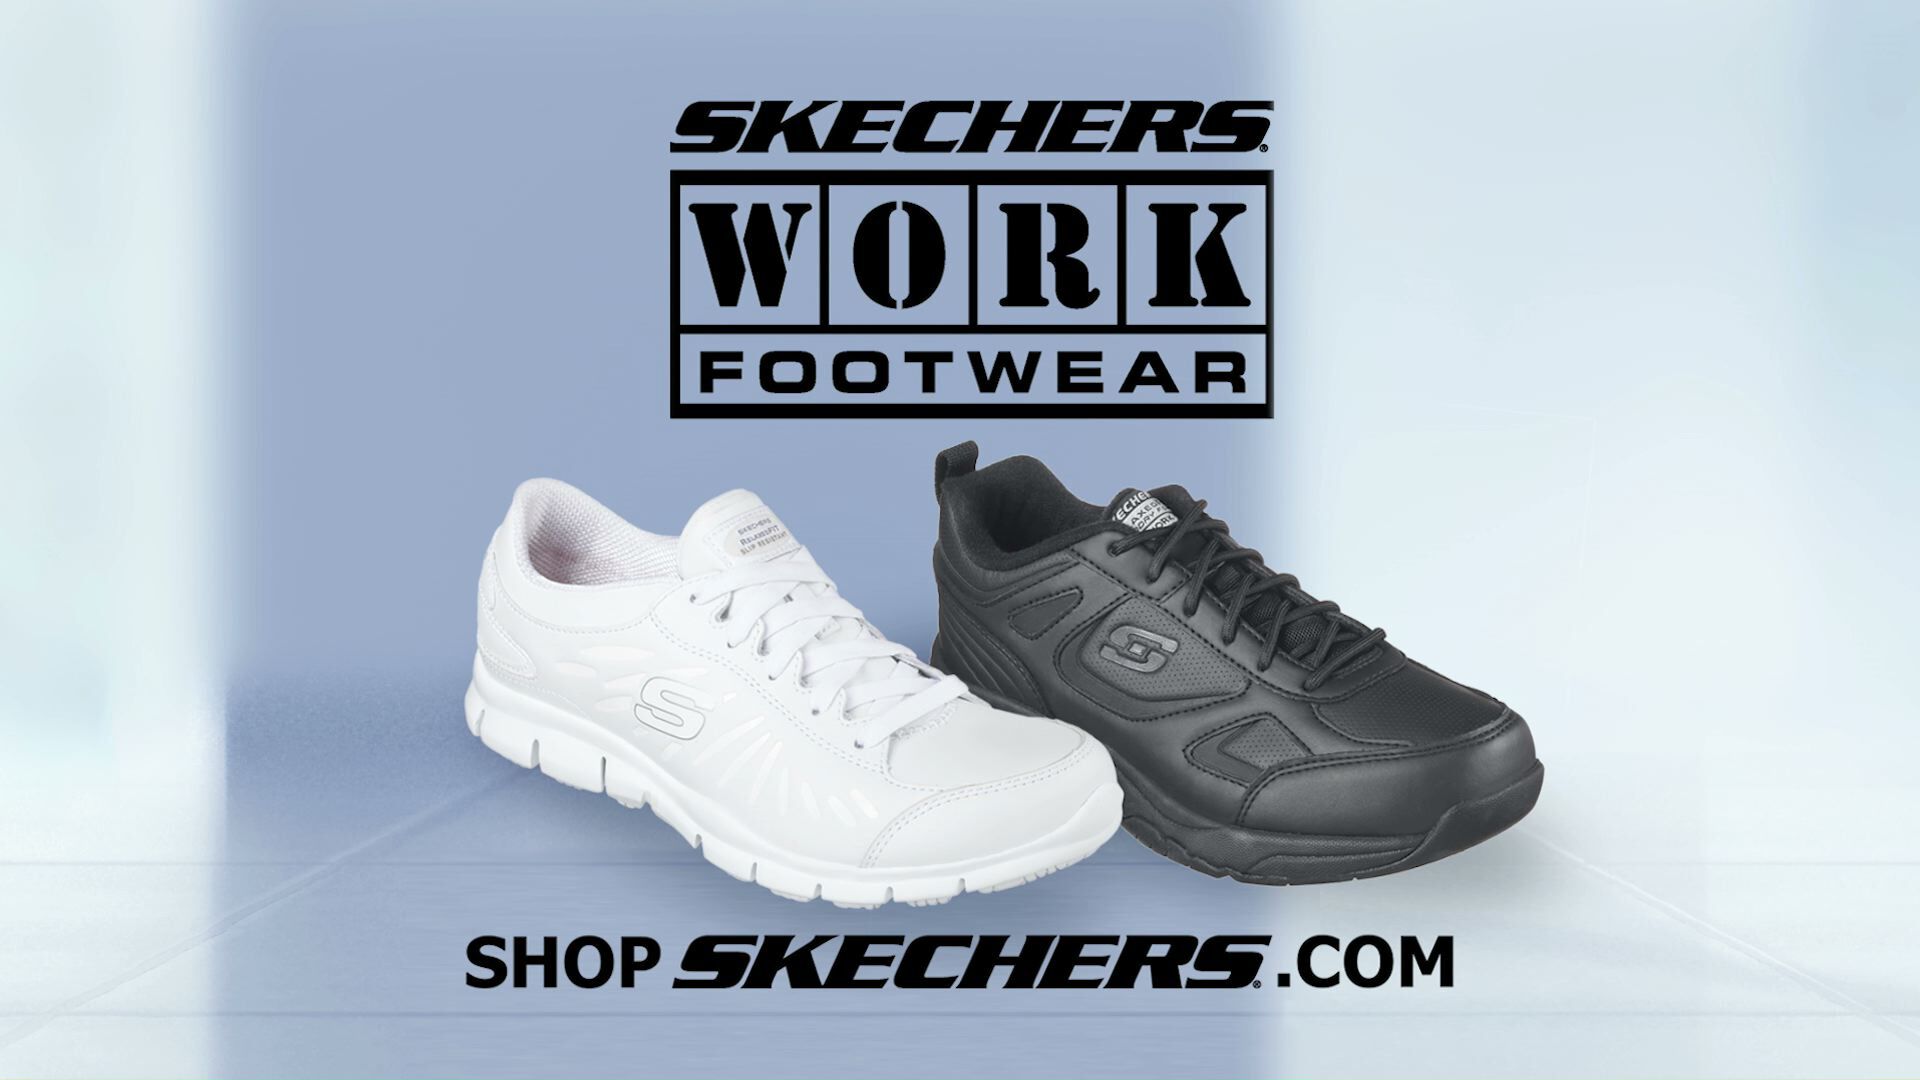 new womens skechers commercial